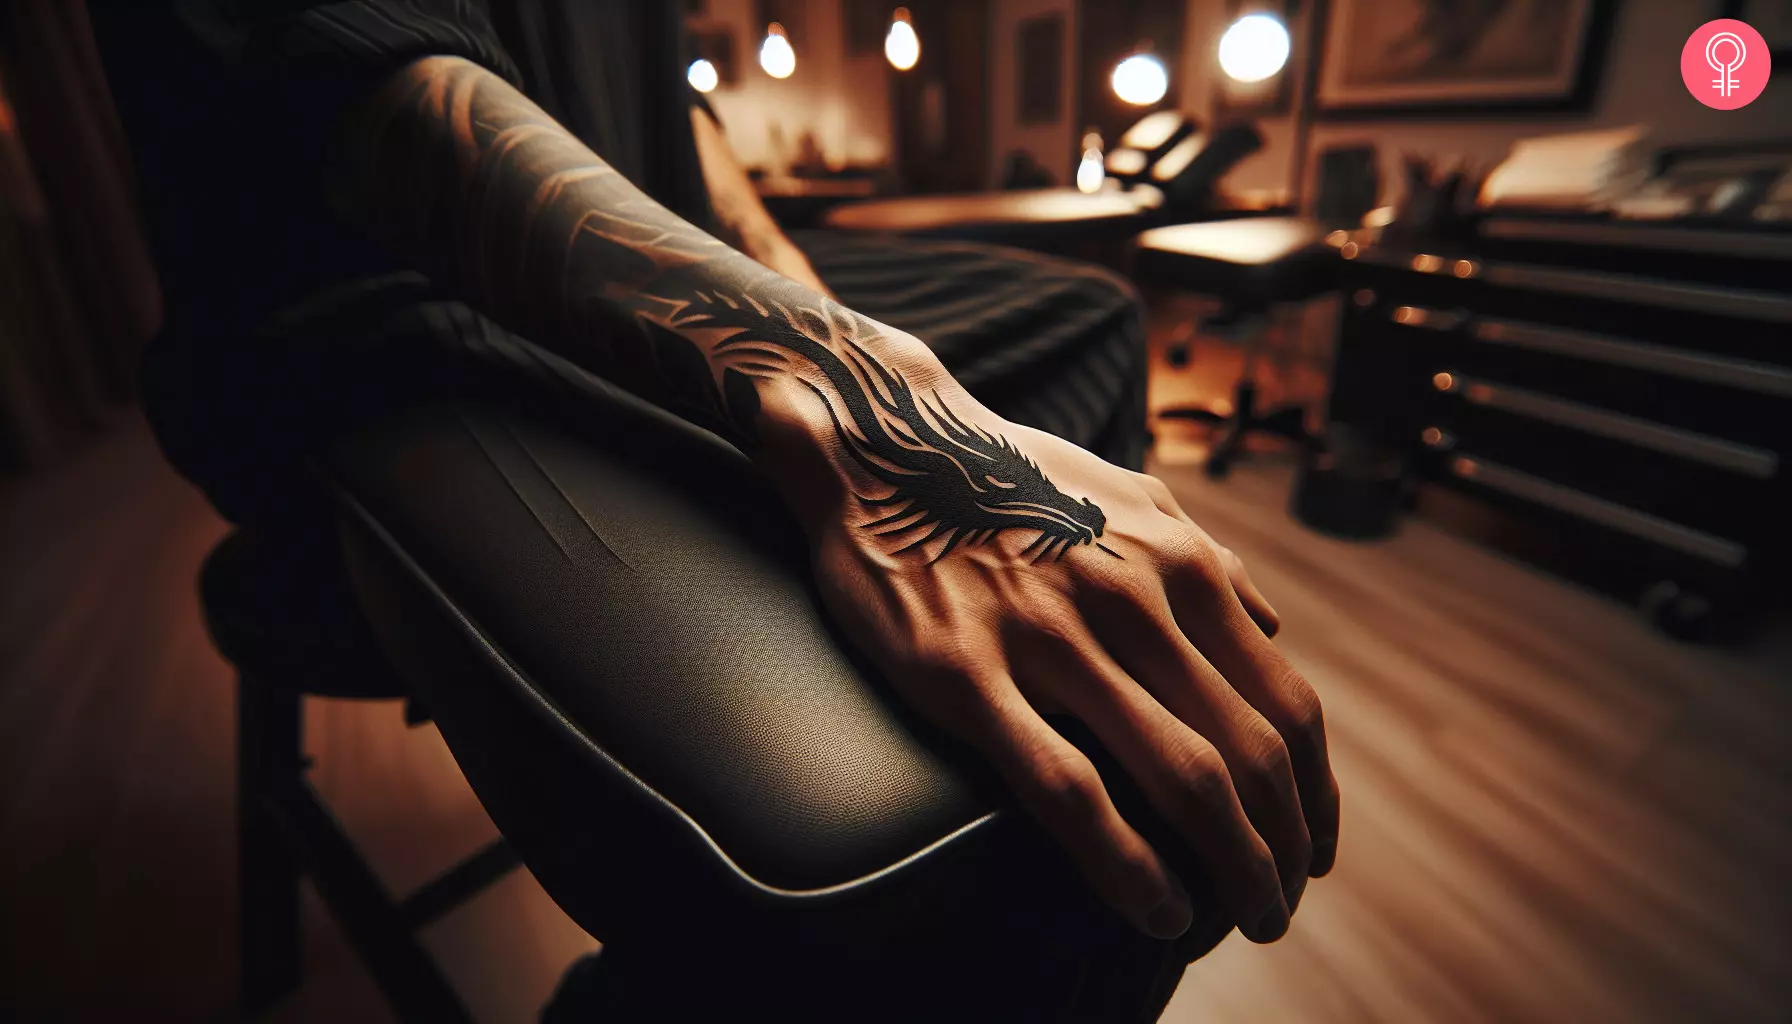 A sleek dragon head tattoo on the back of the hand of a man